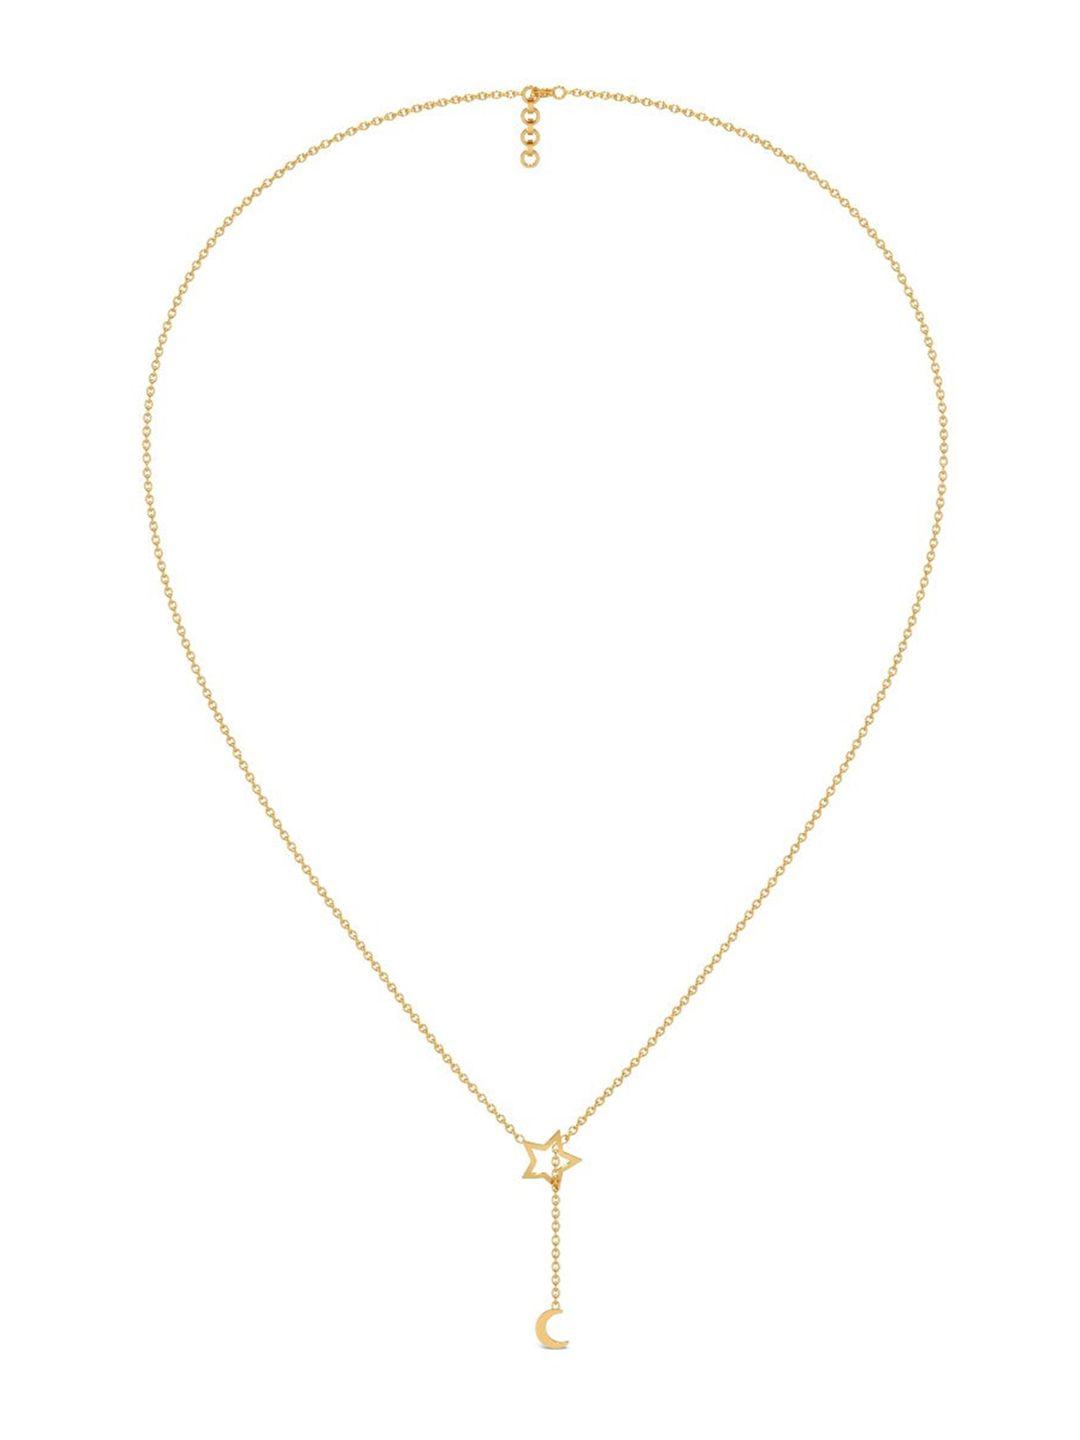 candere-a-kalyan-jewellers-company-14kt-gold-necklace-1.53gm